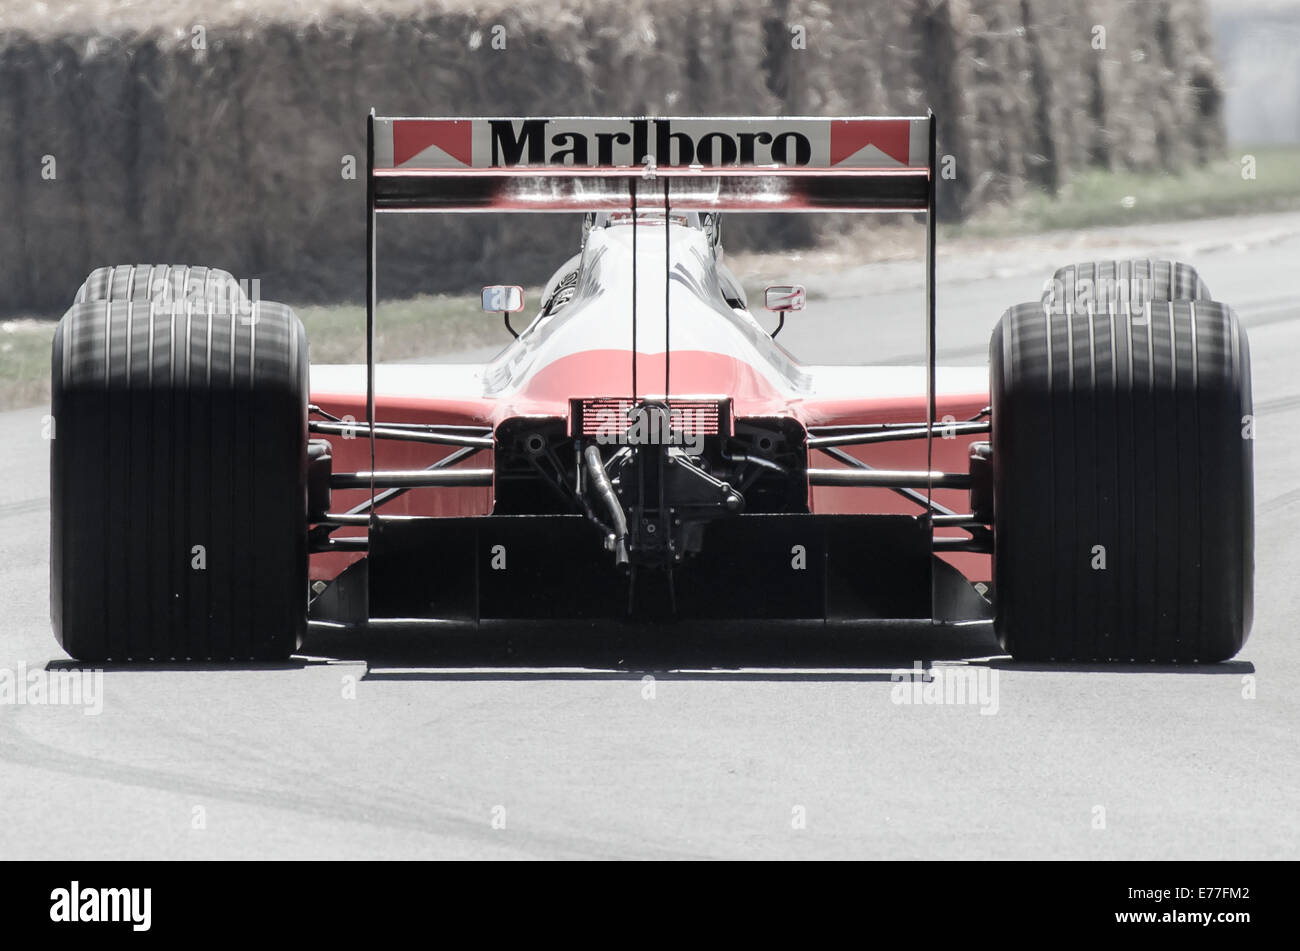 The McLaren MP4/4 was a successful F1 car that competed in the '88 season driven by Ayrton Senna and Alan Prost. Desaturated image. Rear view Stock Photo